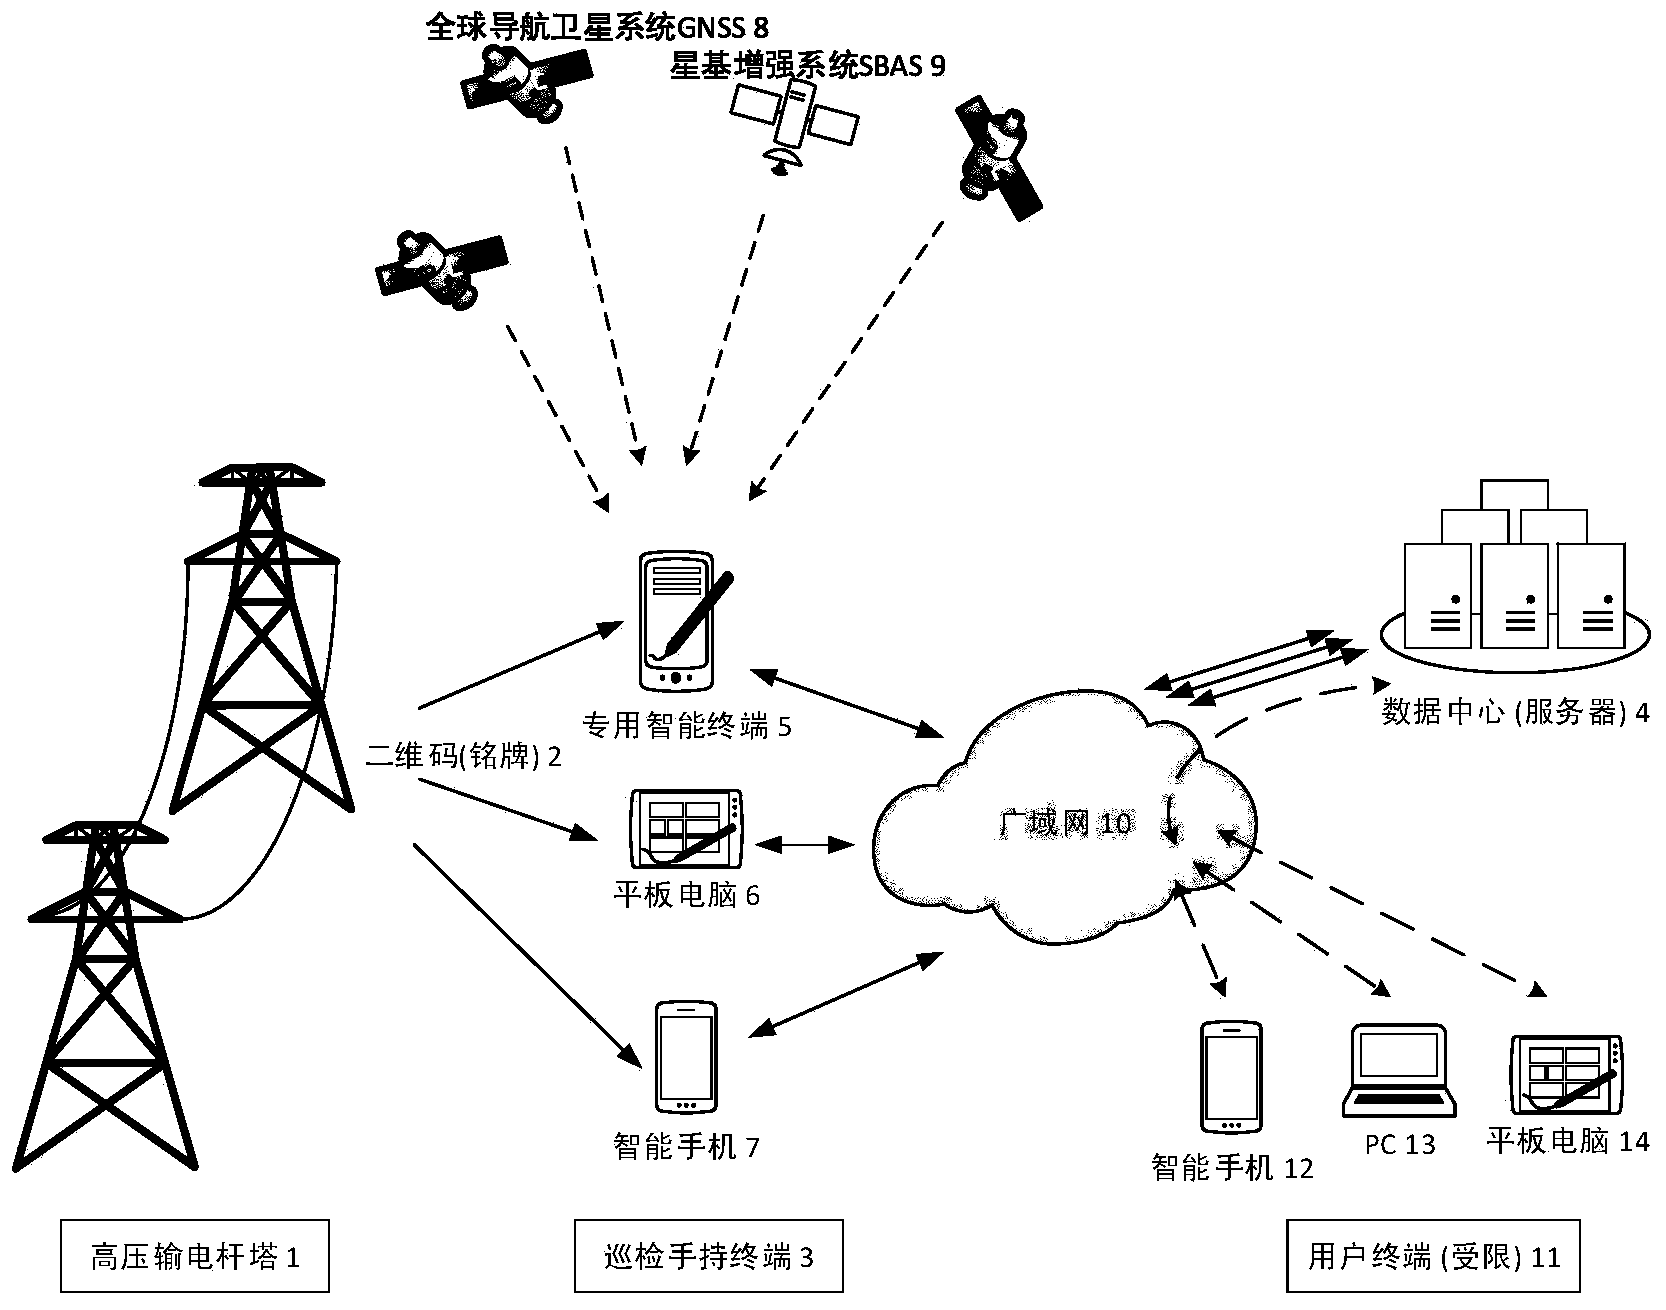 High voltage transmission tower patrol system based on GNSS (global navigation satellite system) and two-dimension code